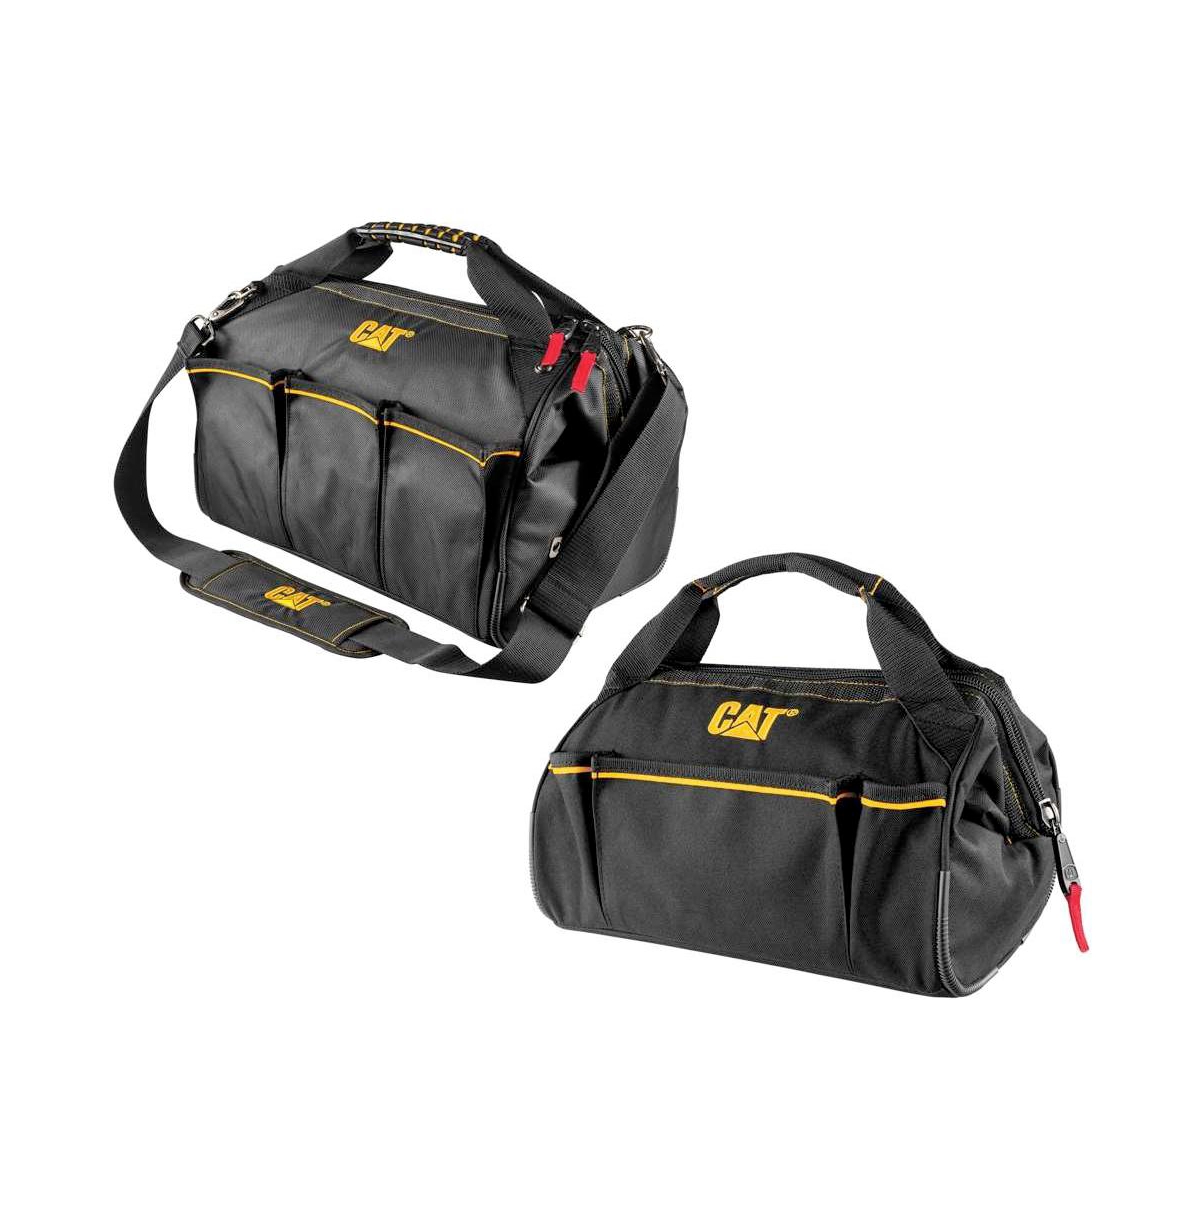 2 Piece Wide Mouth Tool Bag Set with 13-Inch and 16-Inch Bags - Black